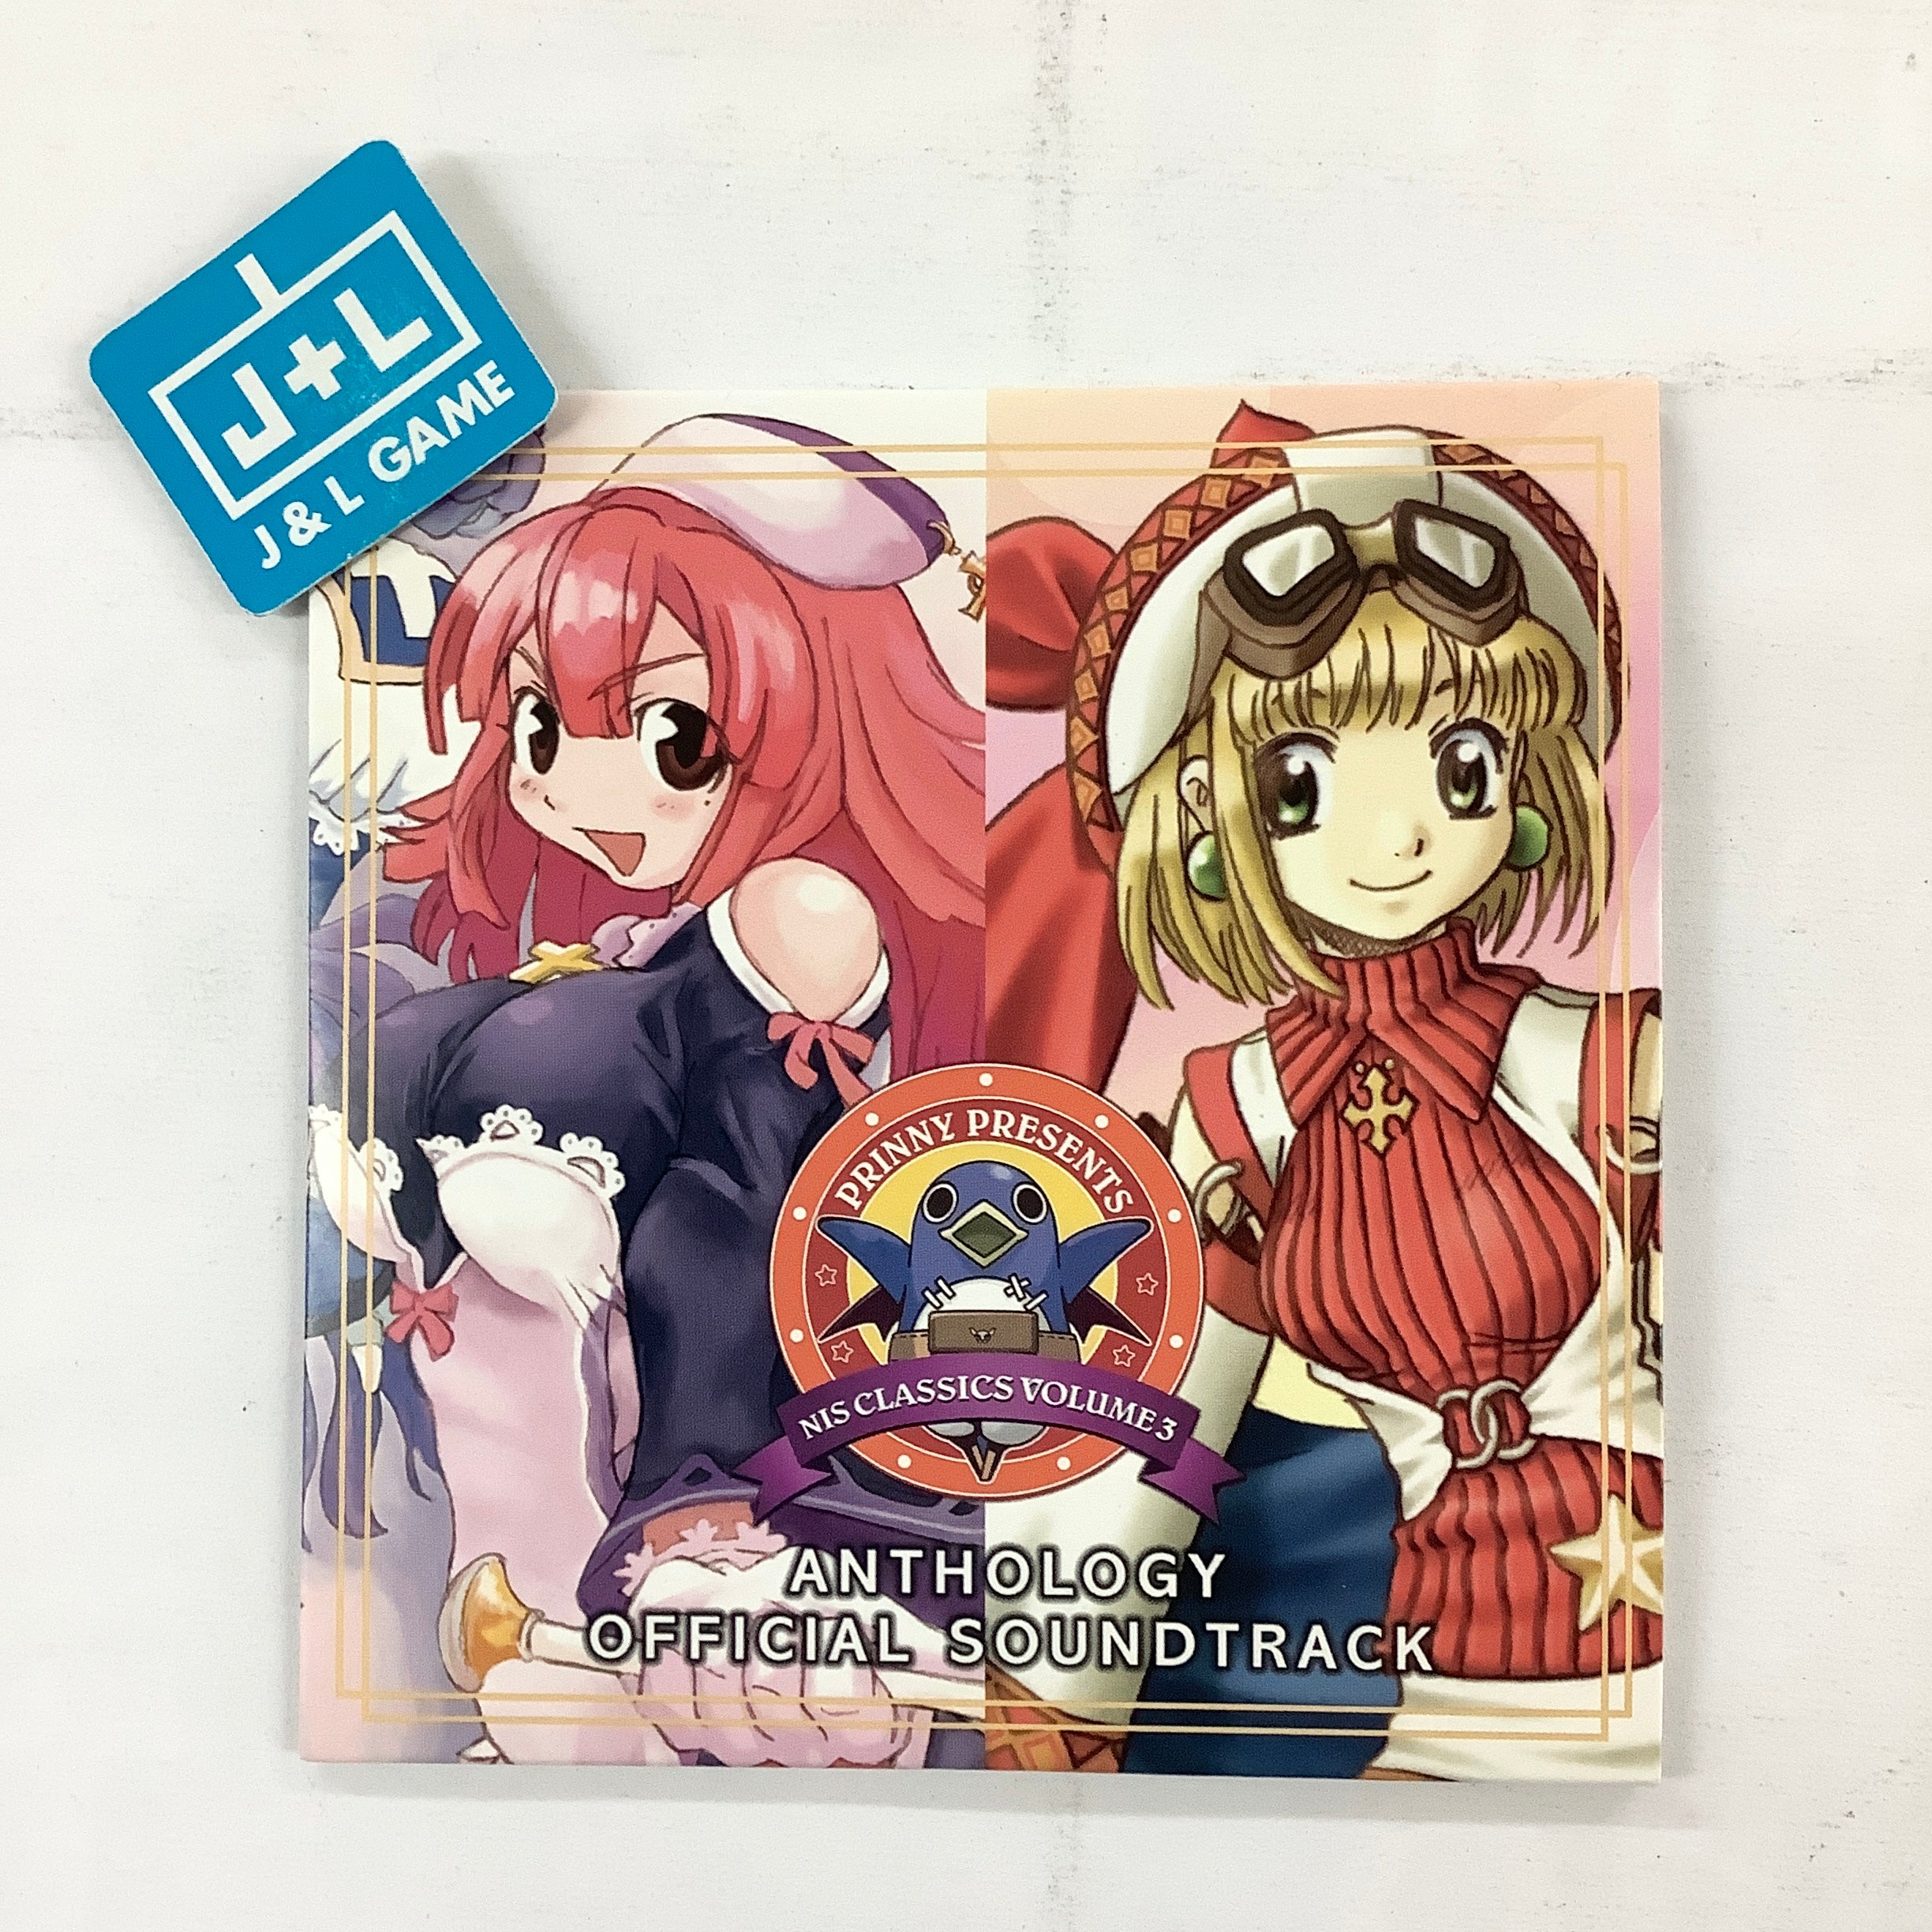 Prinny Presents NIS Classics Volume 3: La Pucelle: Ragnarok / Rhapsody: A Musical Adventure Deluxe Edition - (NSW) Nintendo Switch  [UNBOXING] Video Games NIS America   